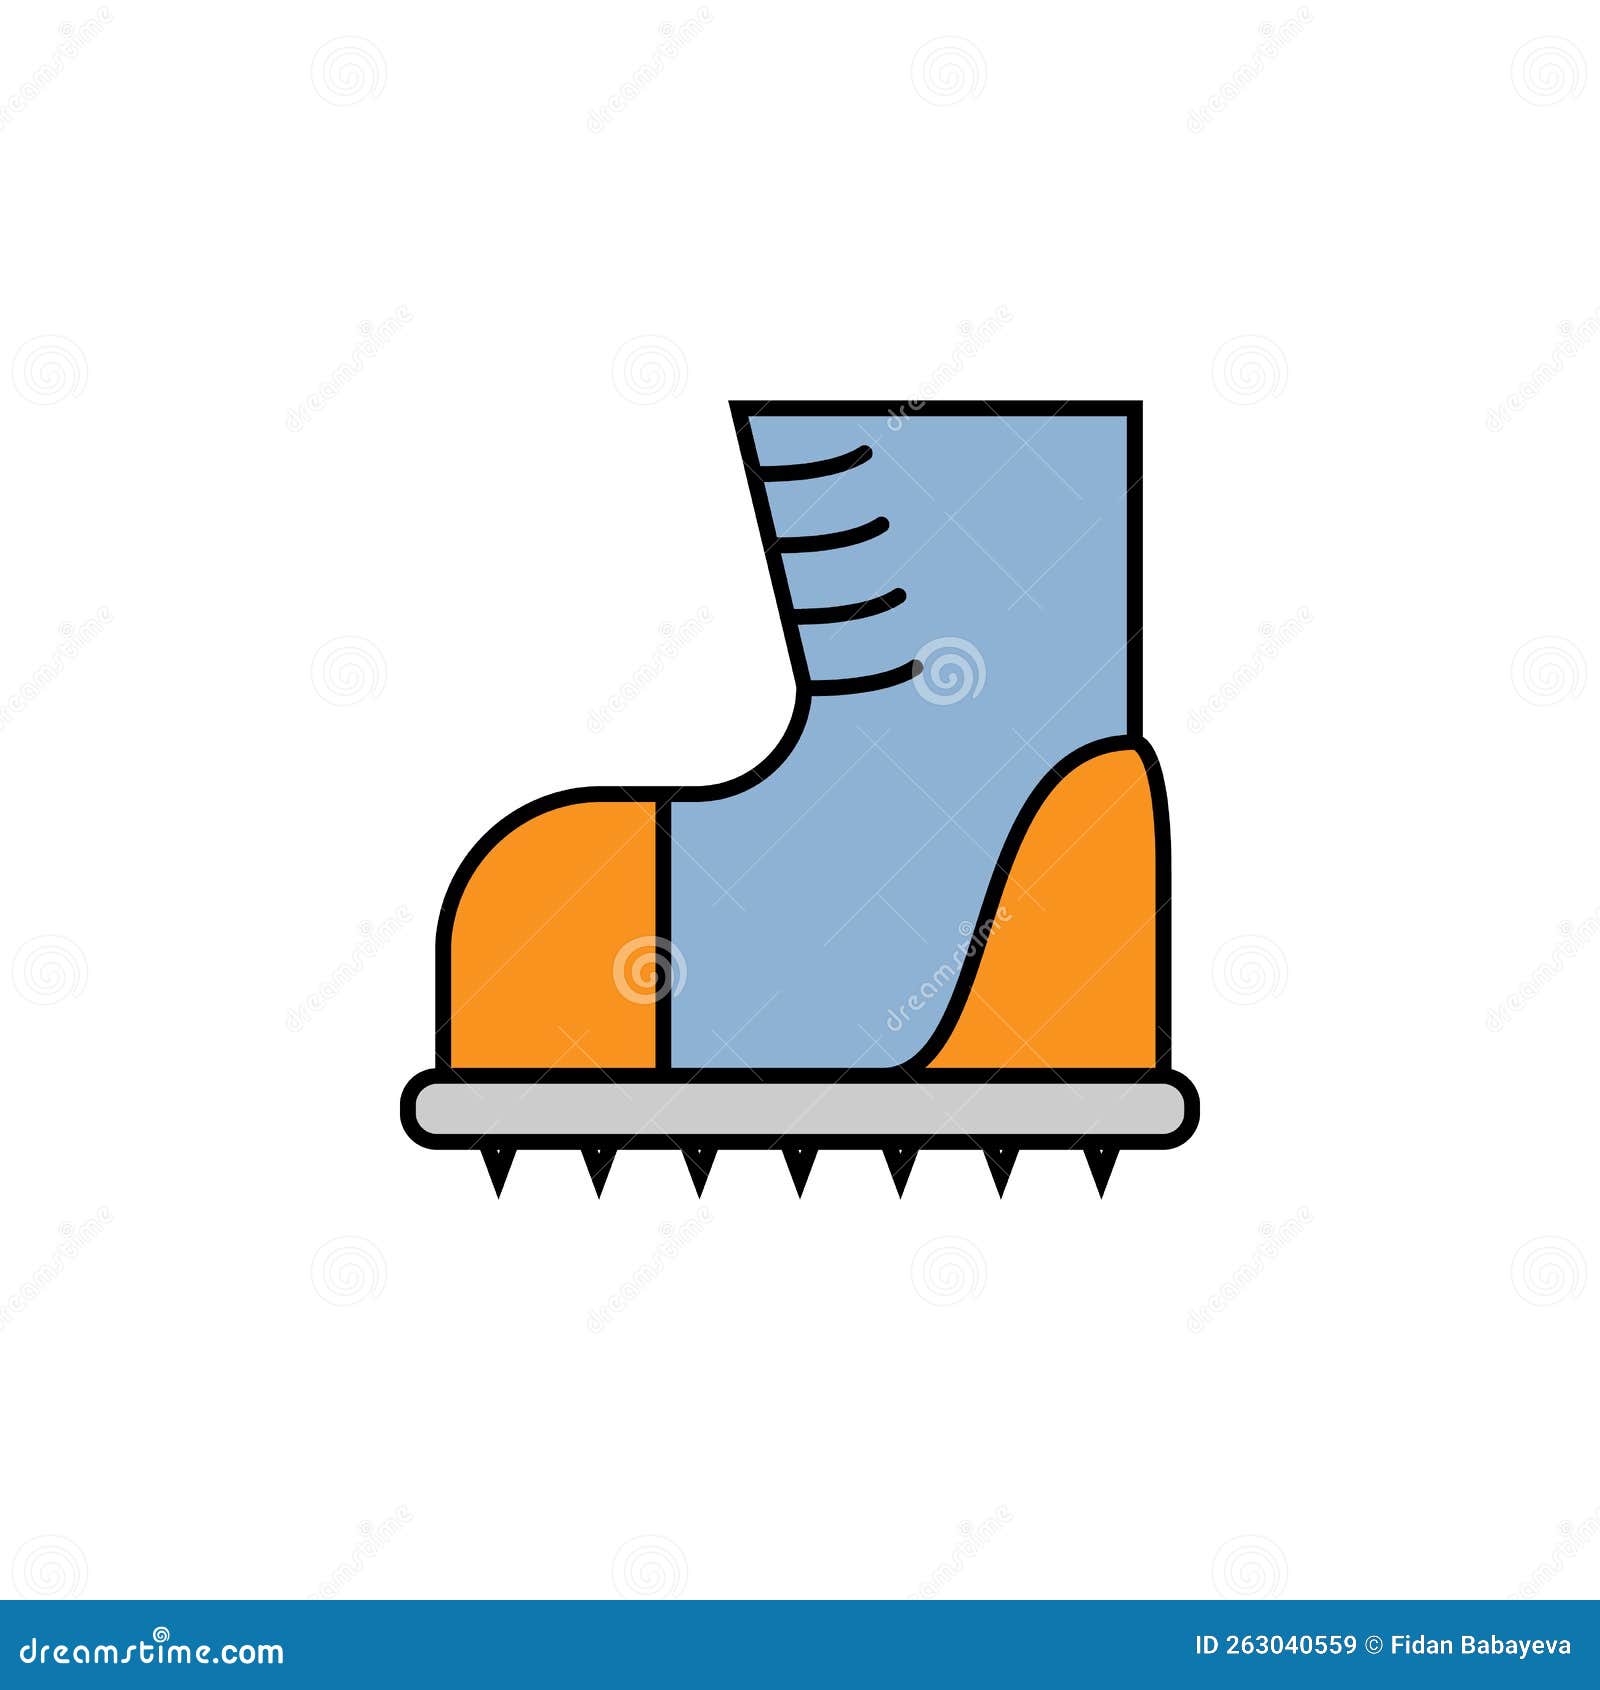 Footwear, Climbing, Line Icon on White Background. Elements of Mountaineering Icon Stock Vector - Illustration of activity, single: